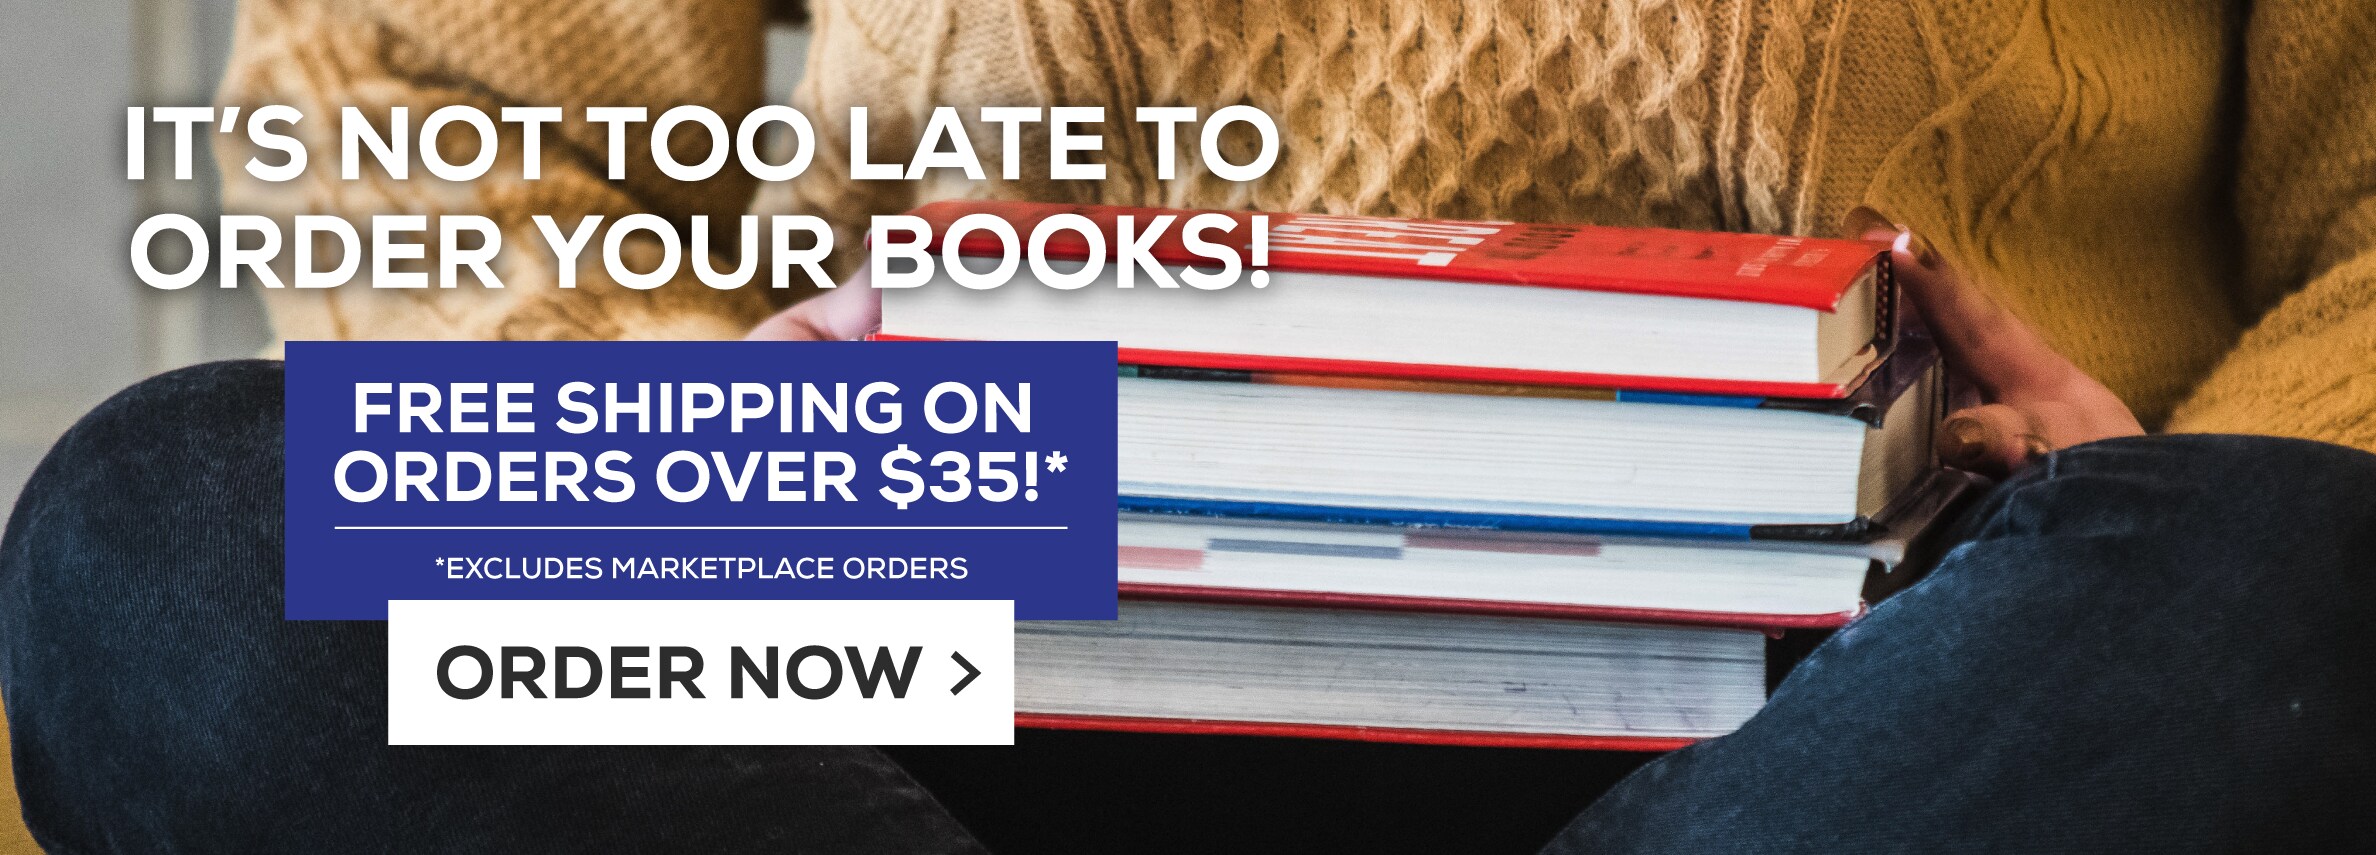 ItÃ¢â‚¬â„¢s not too late to order your books! Free shipping on orders over $35!* Excludes marketplace purchases. Order Now.